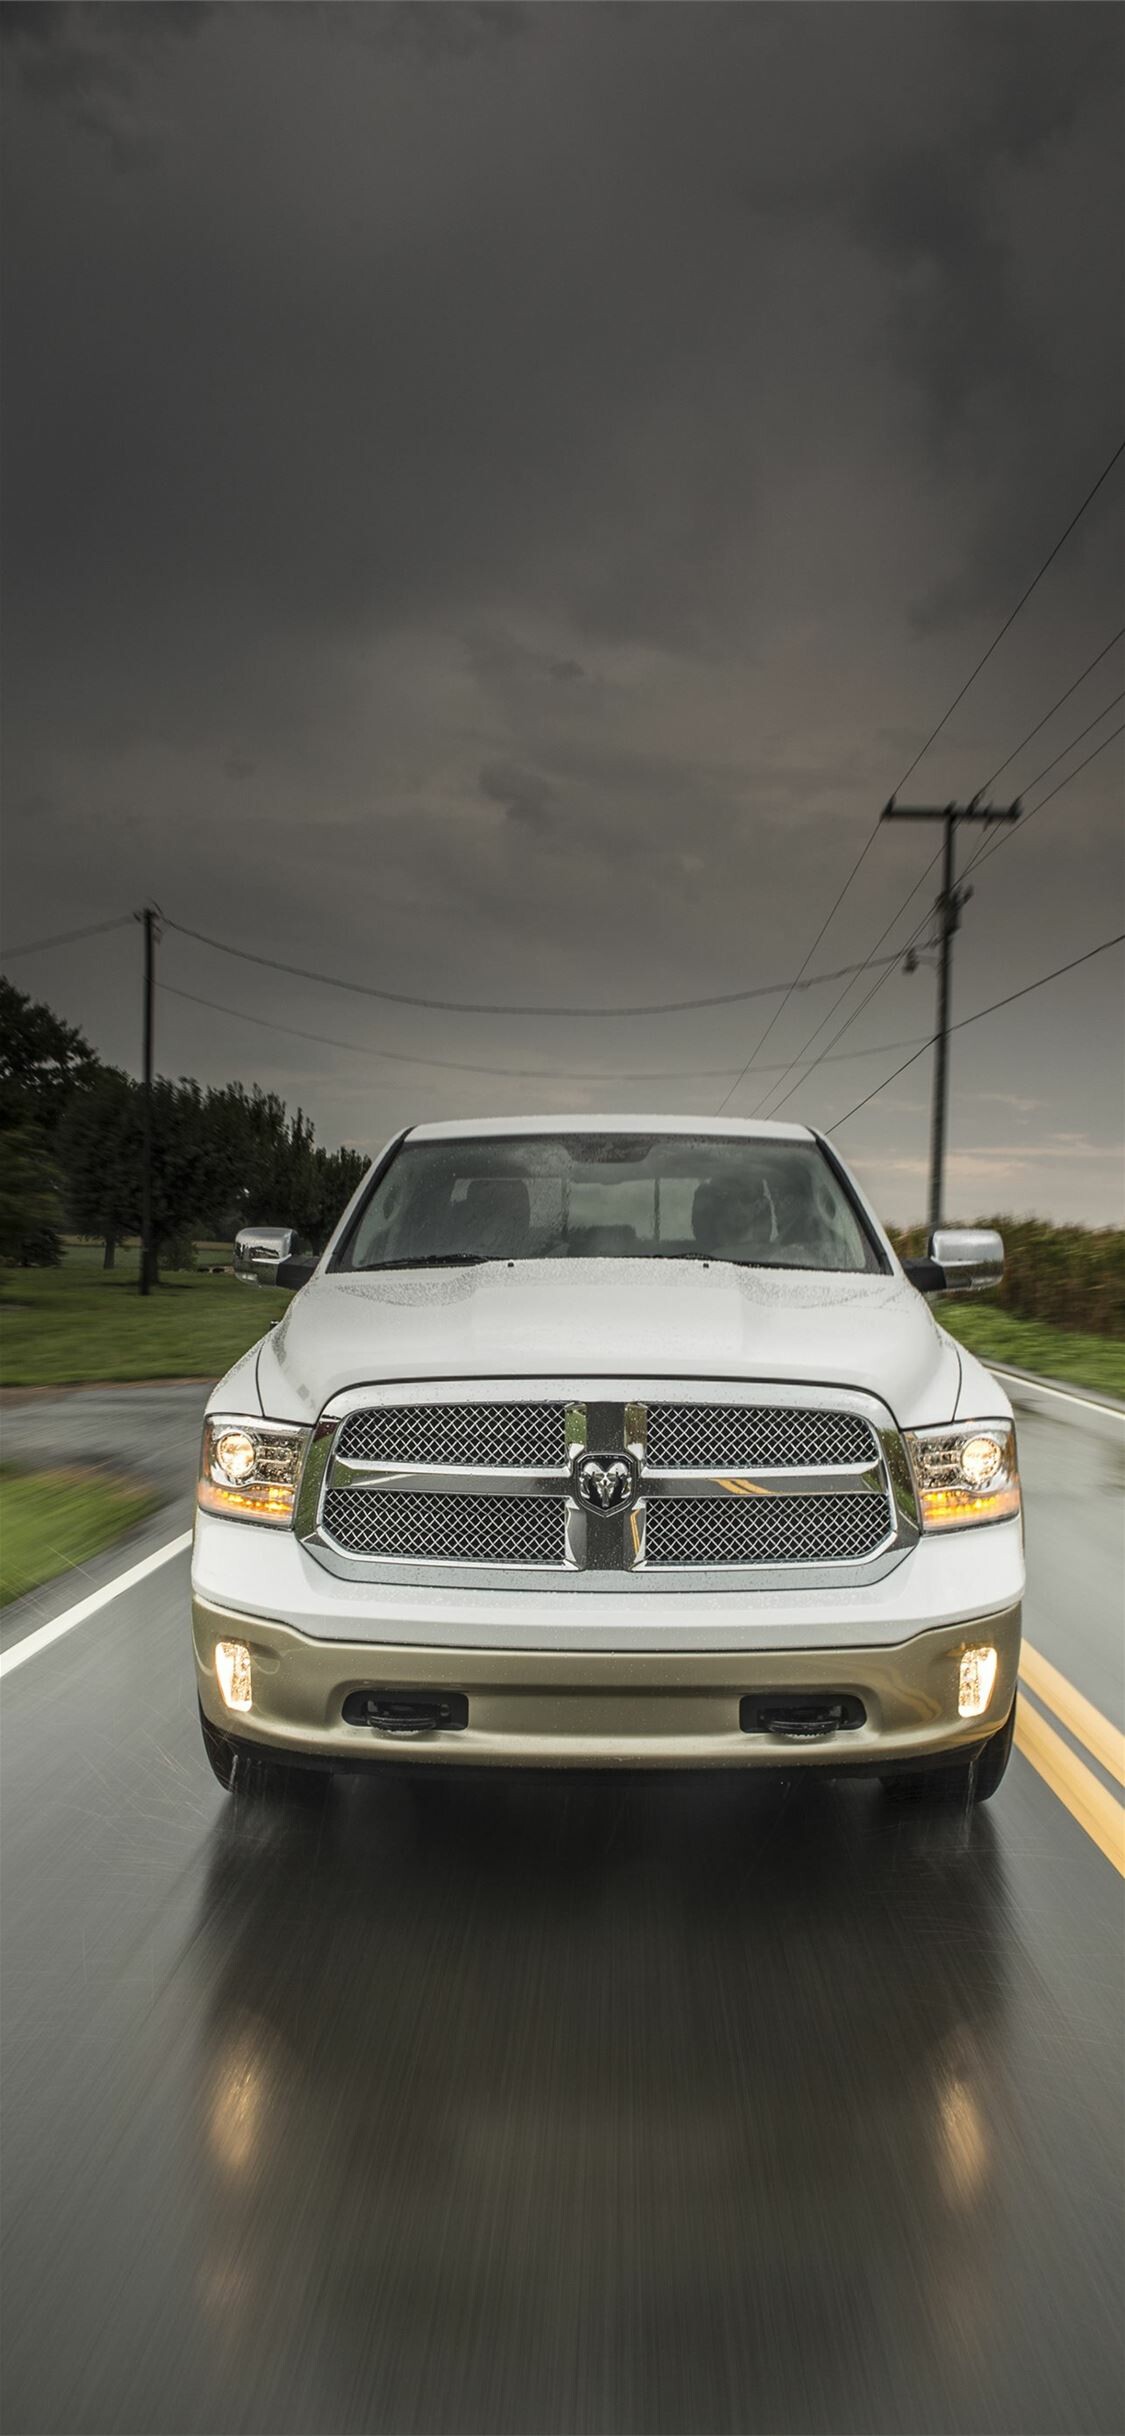 Ram Pickup: 1500 model, The fourth-generation Heavy Duty won the Truck of the Year award in 2010. 1130x2440 HD Background.